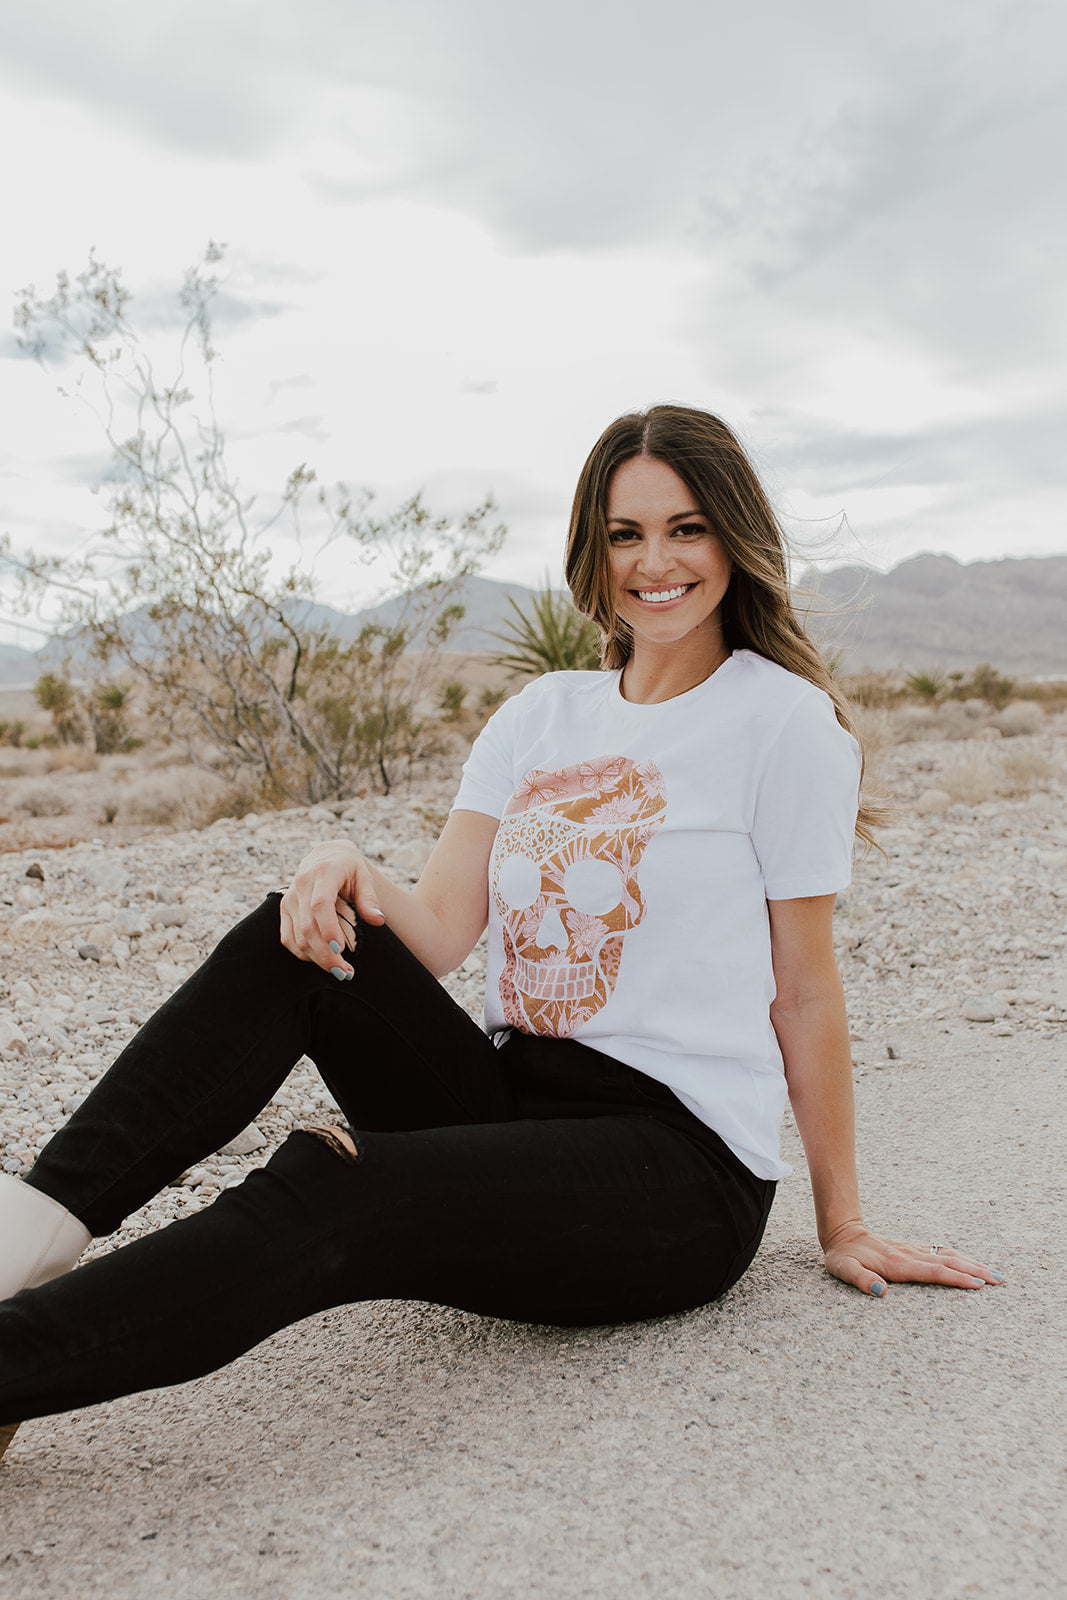 THE PATTERNED SKULL GRAPHIC TEE IN WHITE